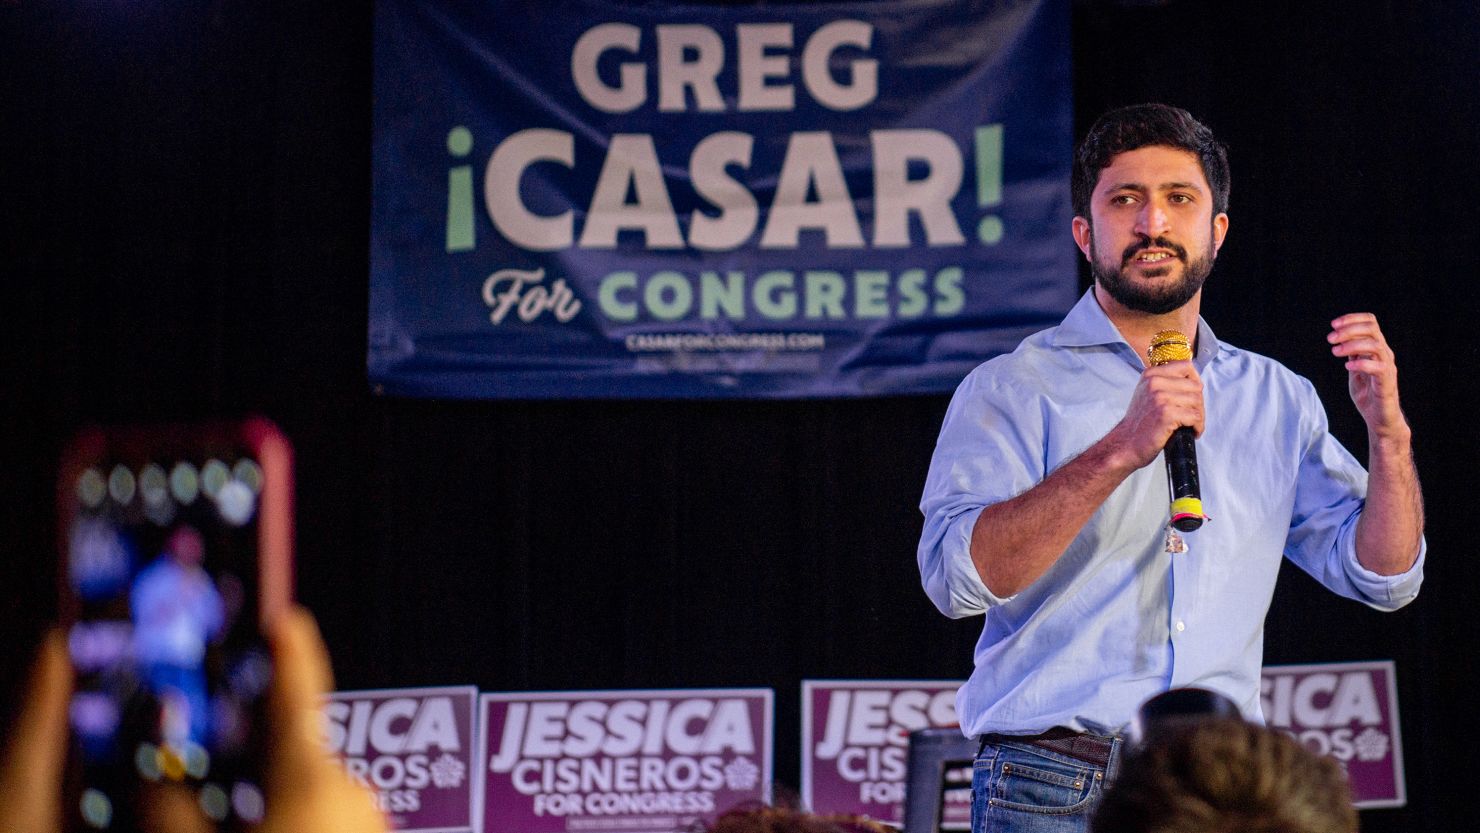 Greg Casar, a Democrat running for Texas' 35th Congressional District, speaks during a get-out-the-vote rally in San Antonio on February 12, 2022.